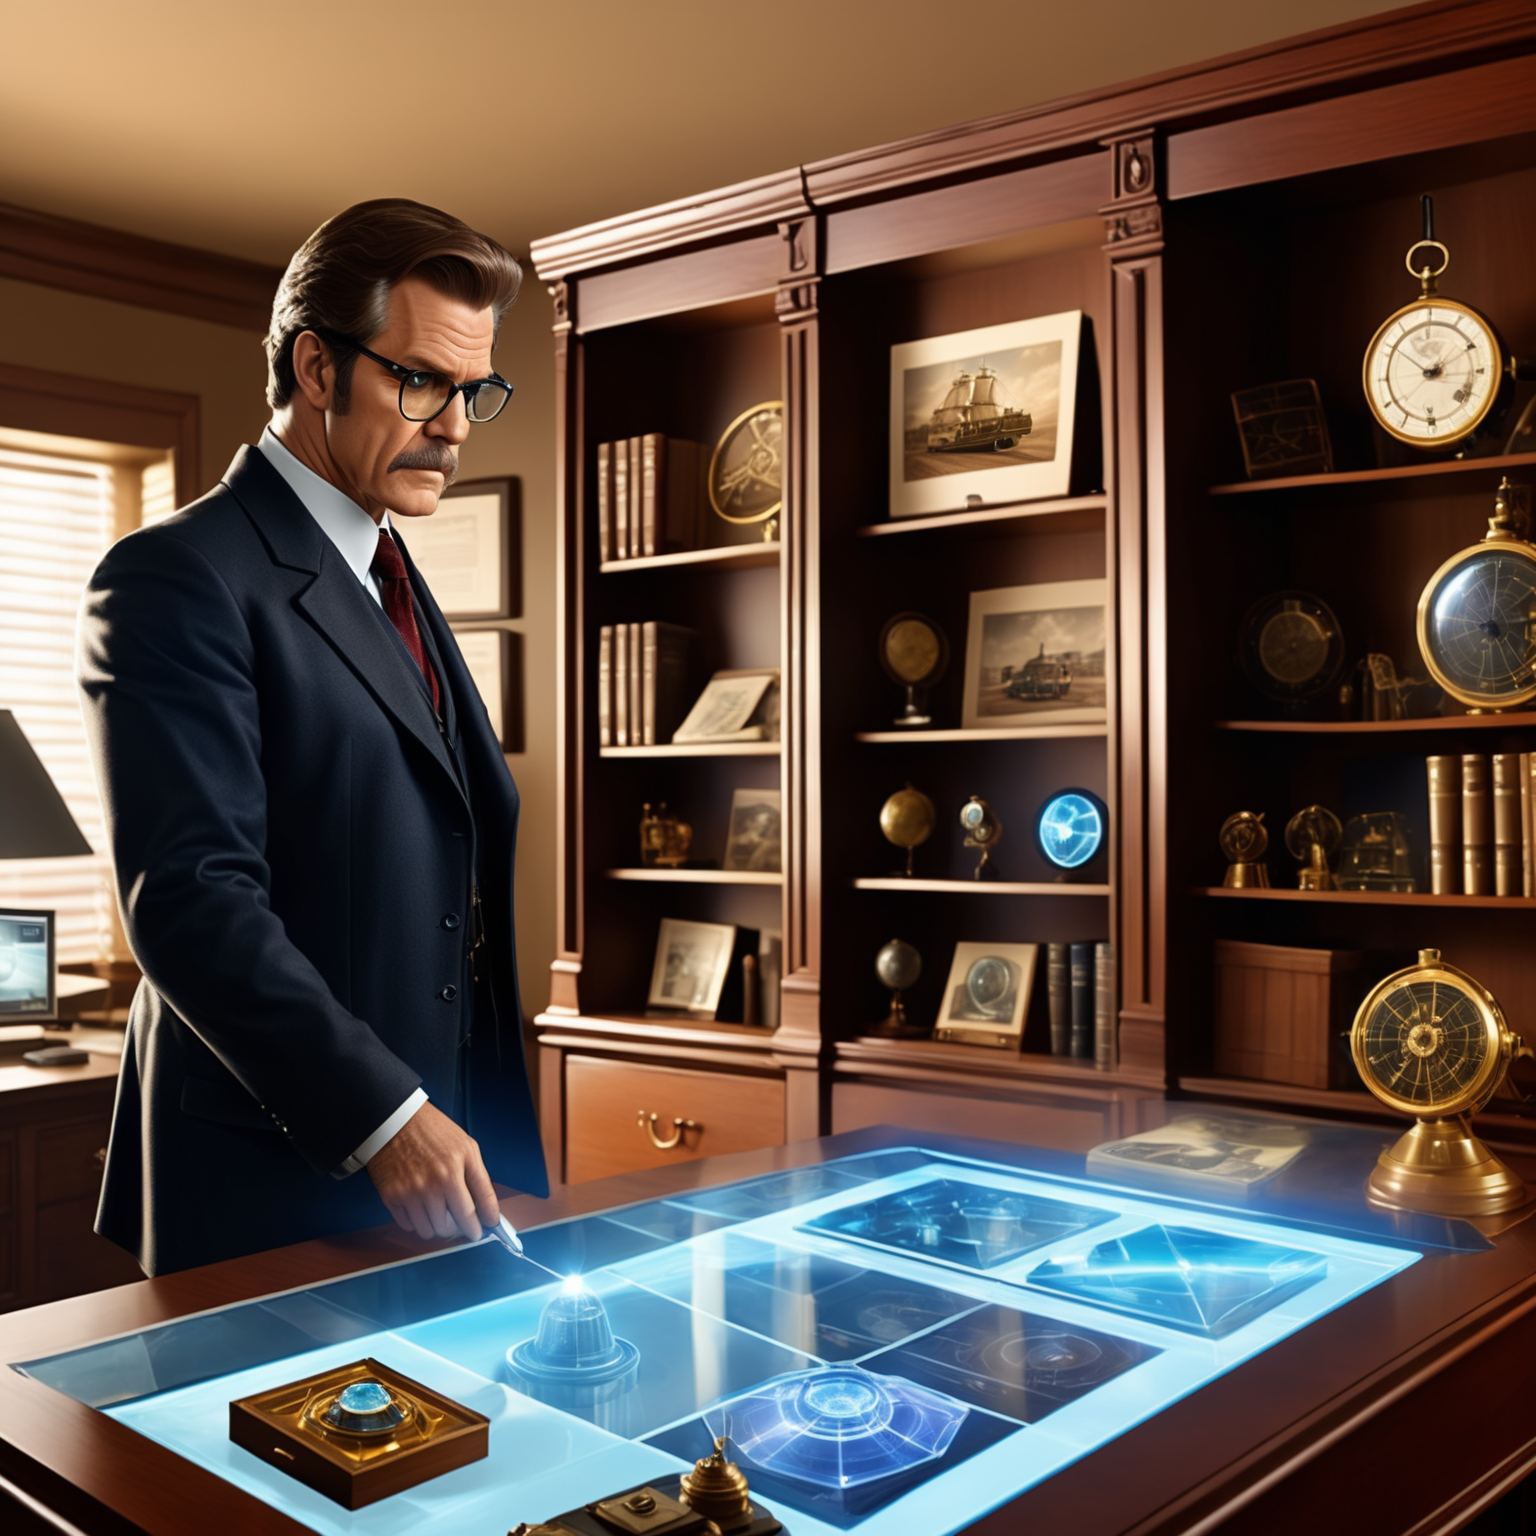 Temporal Detective examining a holographic timeline in his office filled with artifacts from different eras. The scene sho...